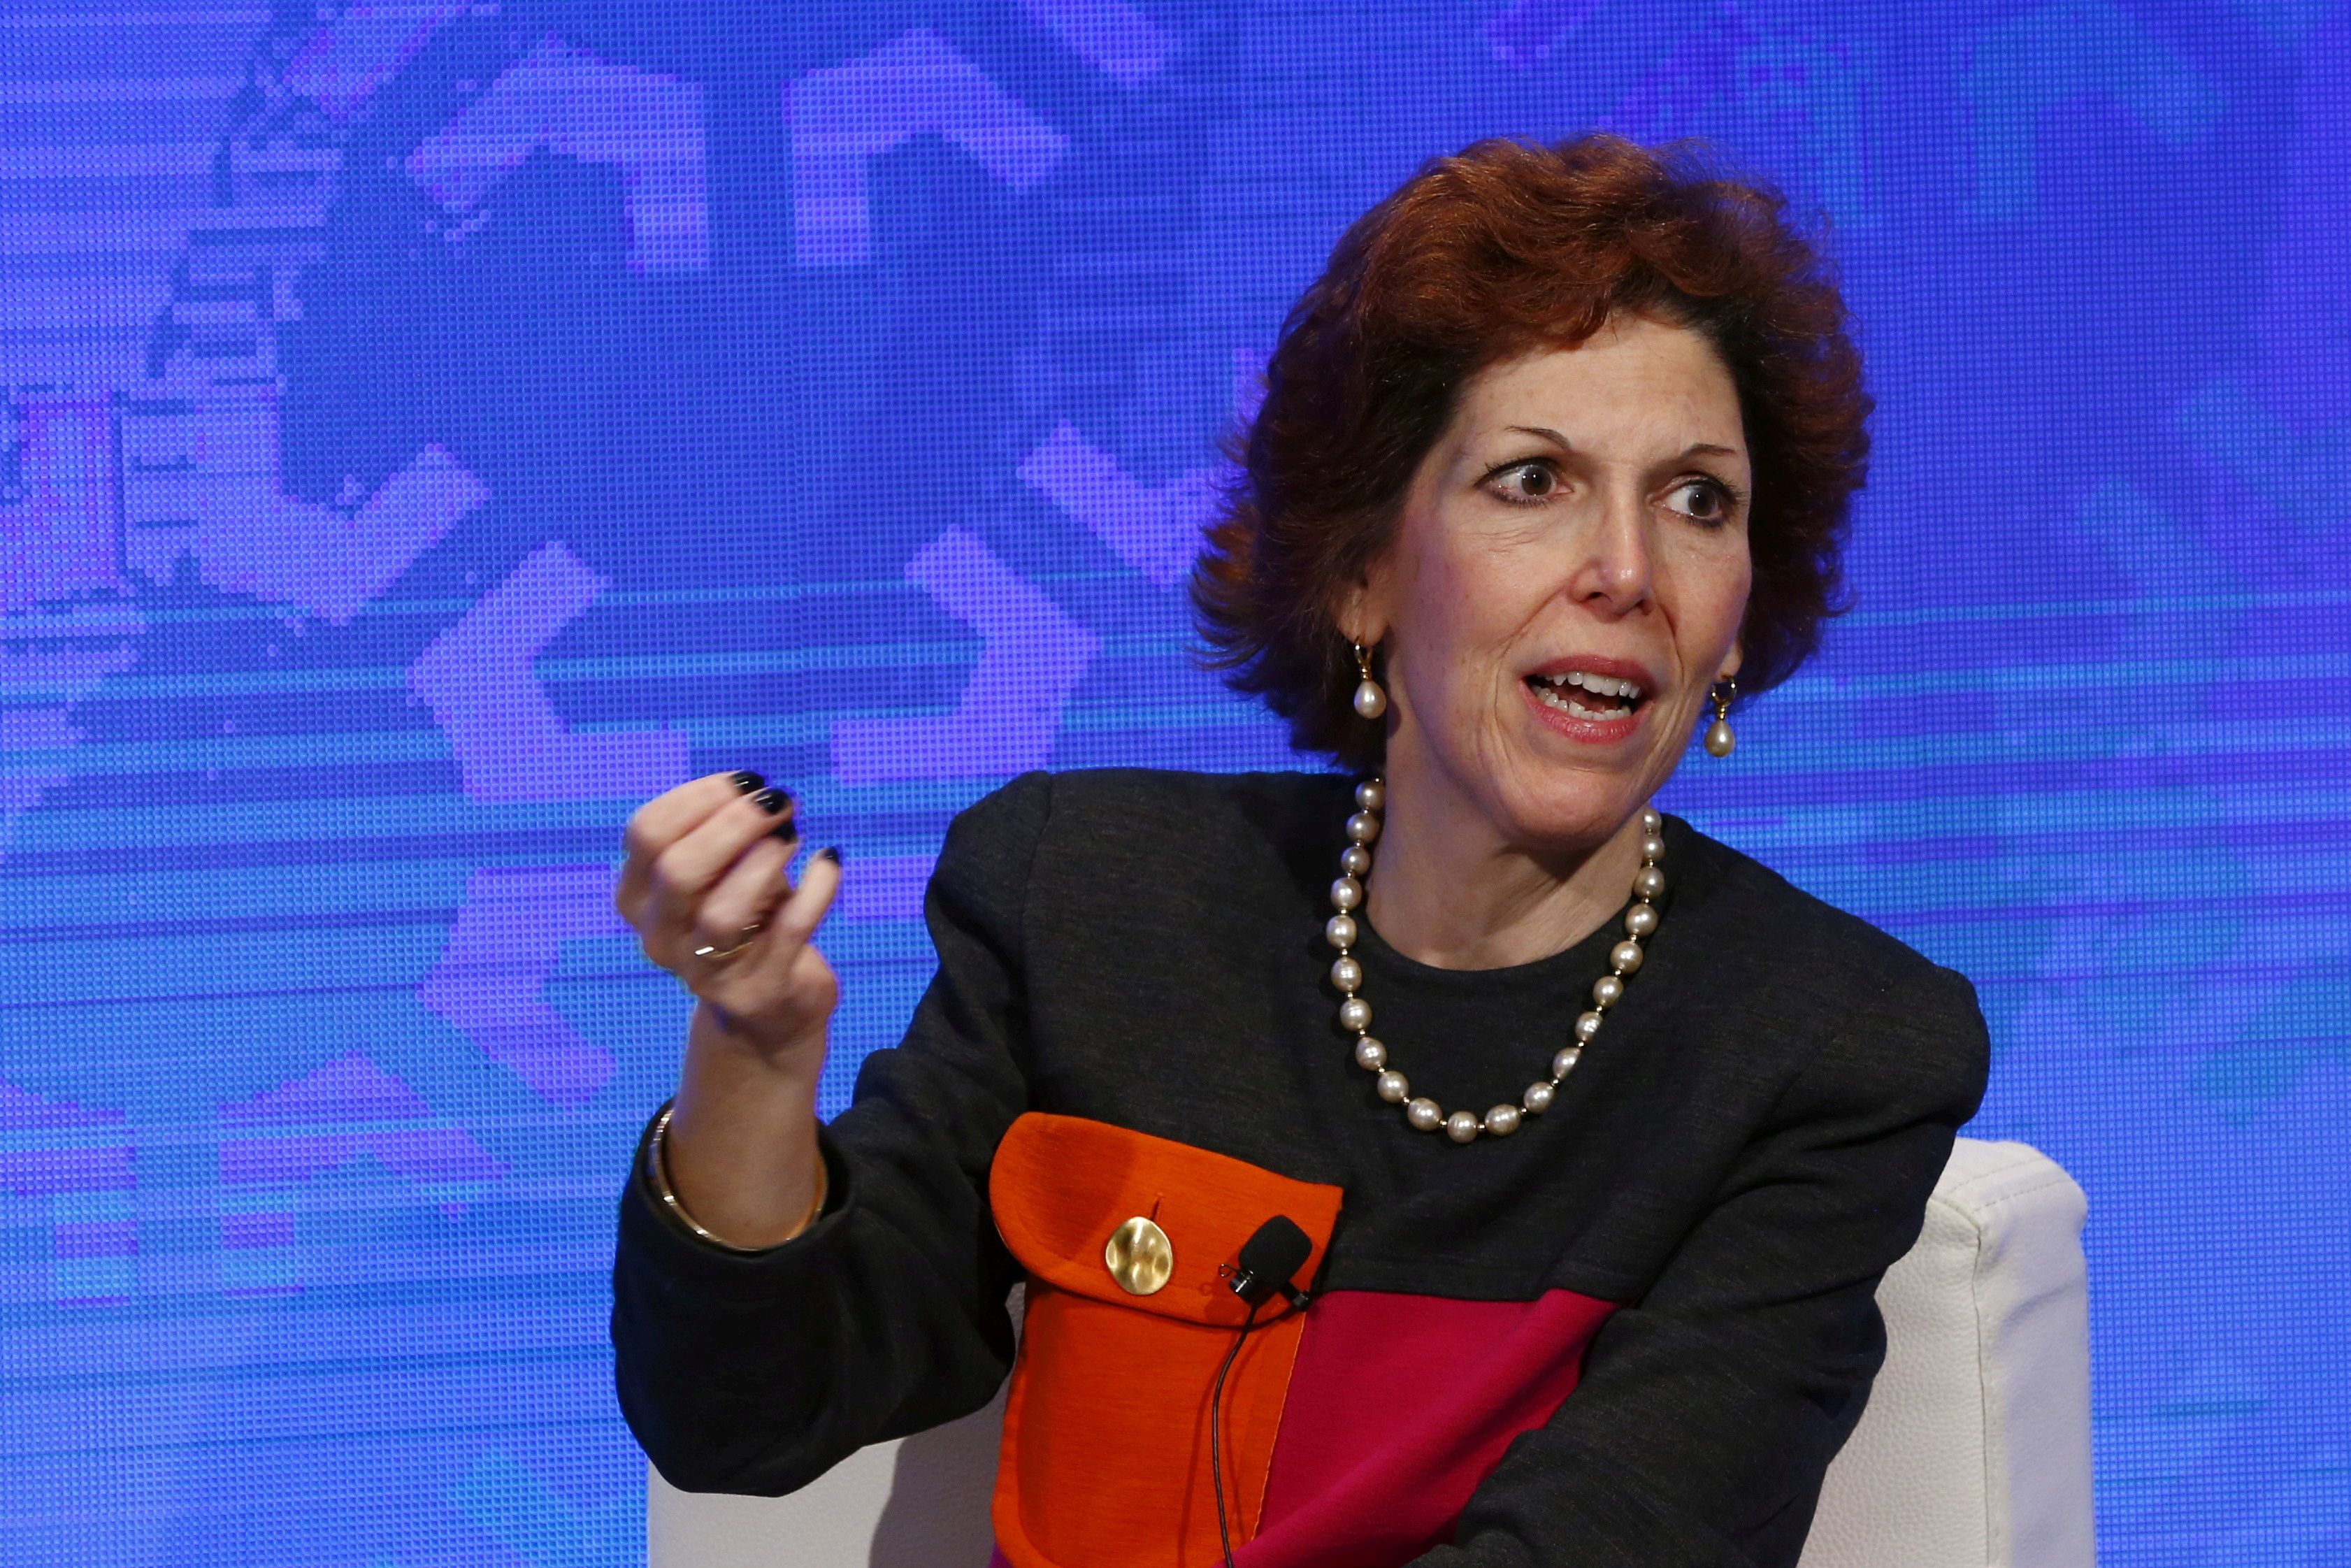 Cleveland Fed President Loretta Mester takes part in a panel convened to speak about the health of the U.S. economy in New York November 18, 2015. REUTERS/Lucas Jackson/File Photo